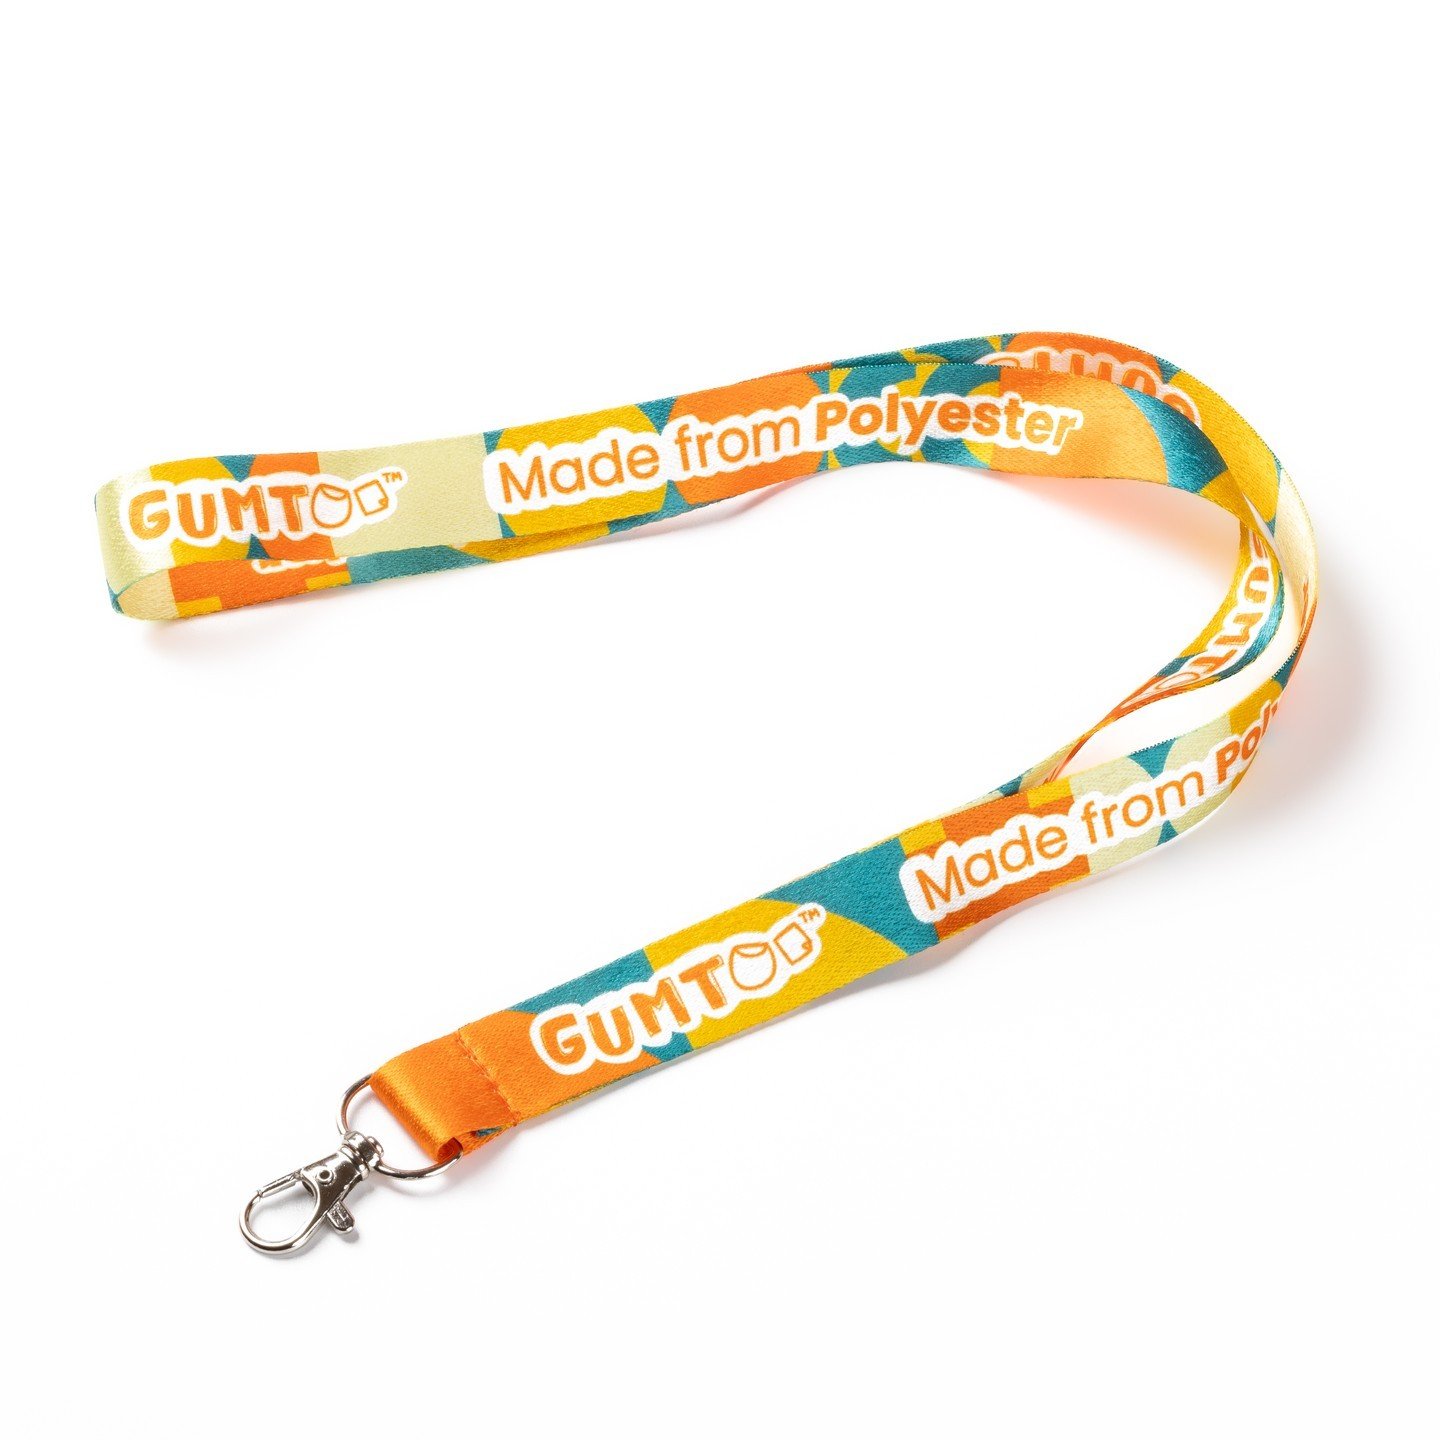 Discover custom Lanyards in Polyester, Bamboo, R-PET, and Nylon.

Polyester: Stand out with durable, high-quality fabric. Get noticed effortlessly!
Bamboo: Make an eco-friendly statement. Join the sustainability movement!
R-PET (Recyclable Plastic): 